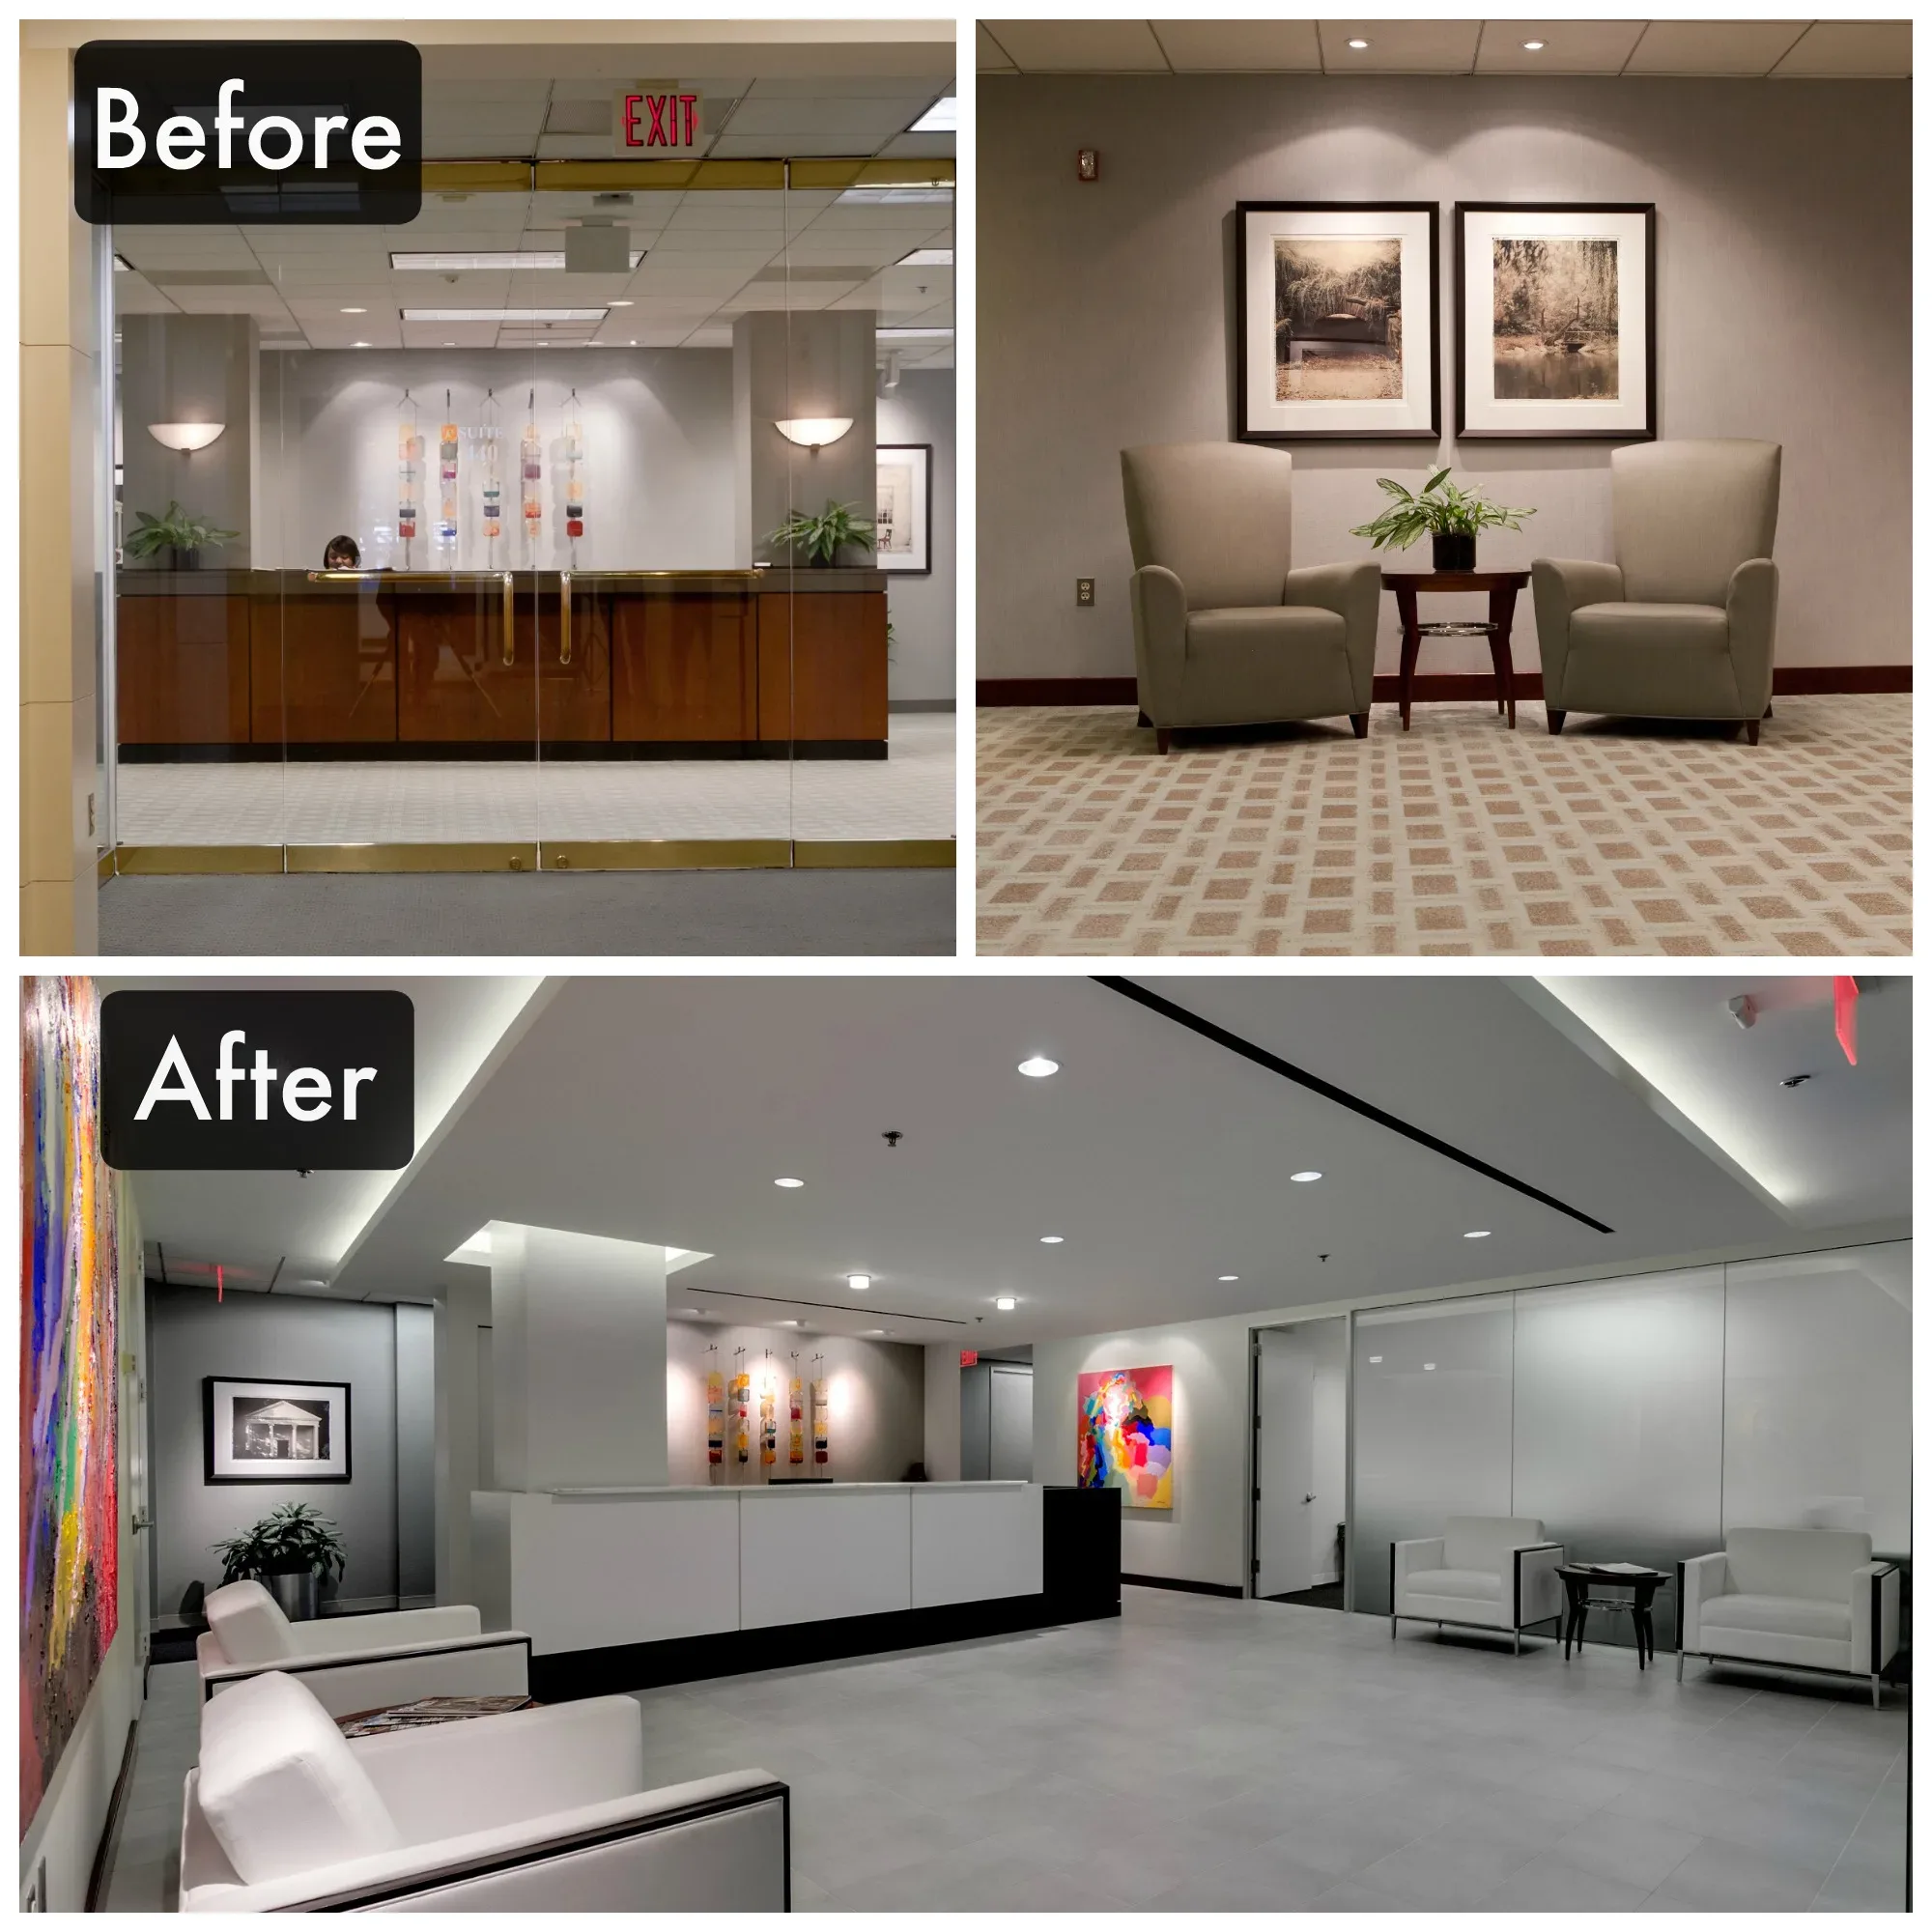 Office lobby renovation: traditional design replaced with a modern aesthetic.